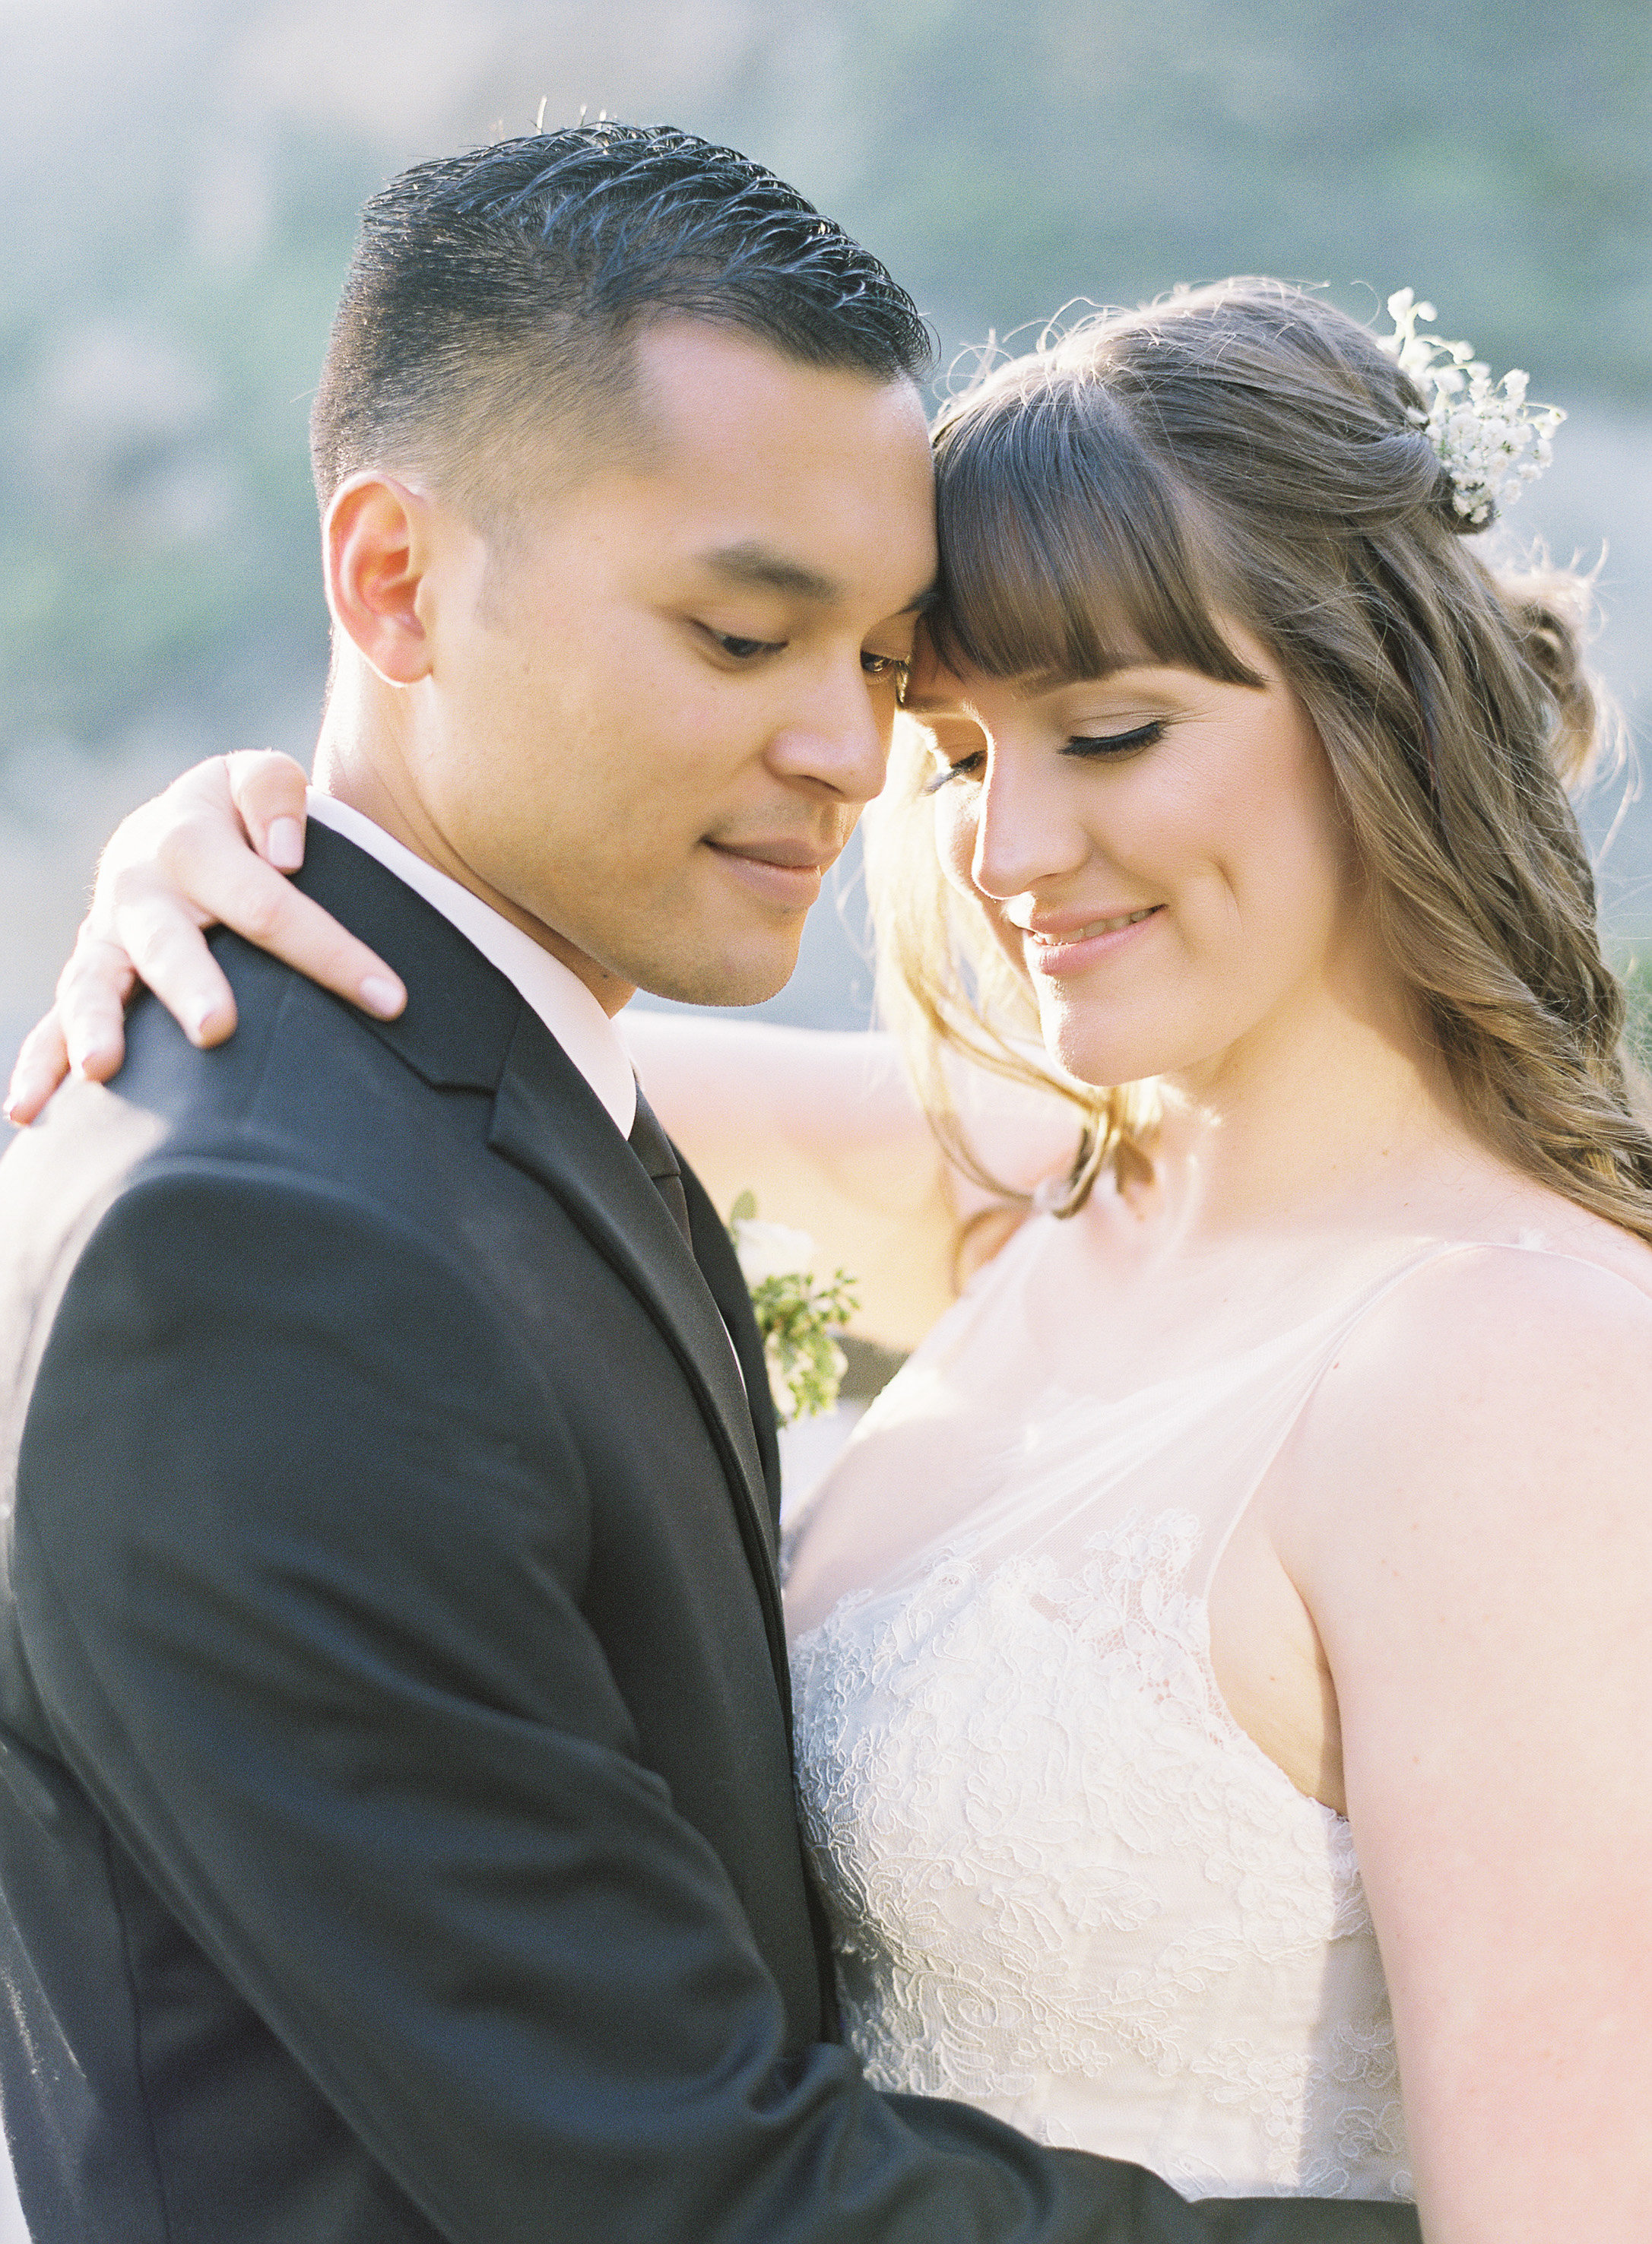 Brunette Bride with Bangs and Hair Down Hugging Husband outdoors. Wedding Hair and Makeup by Vanity Belle in Orange County (Costa Mesa) and San Diego (La Jolla)